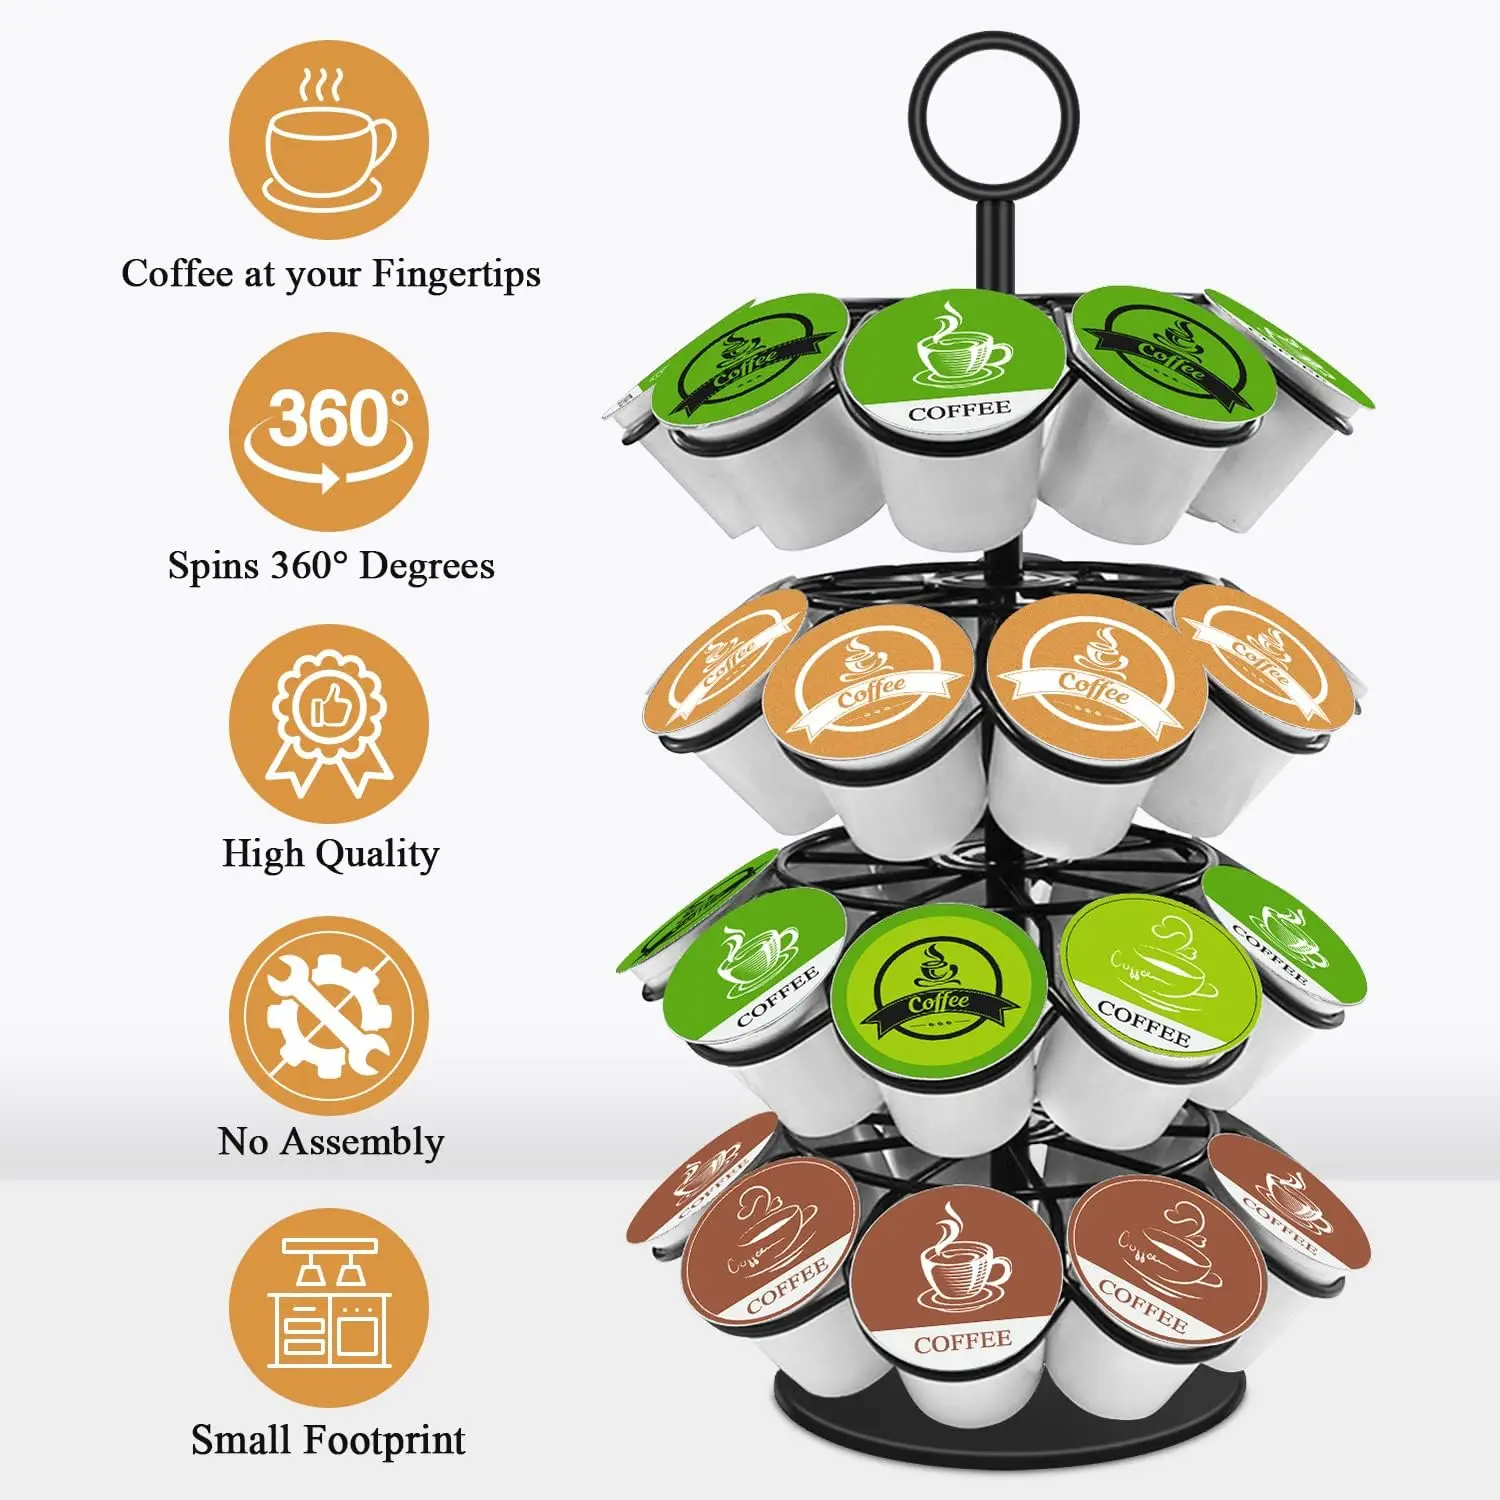 Storage Coffee Capsules Dolce Gusto  Dolce Gusto Coffee Capsule Holder -  K-cup - Aliexpress